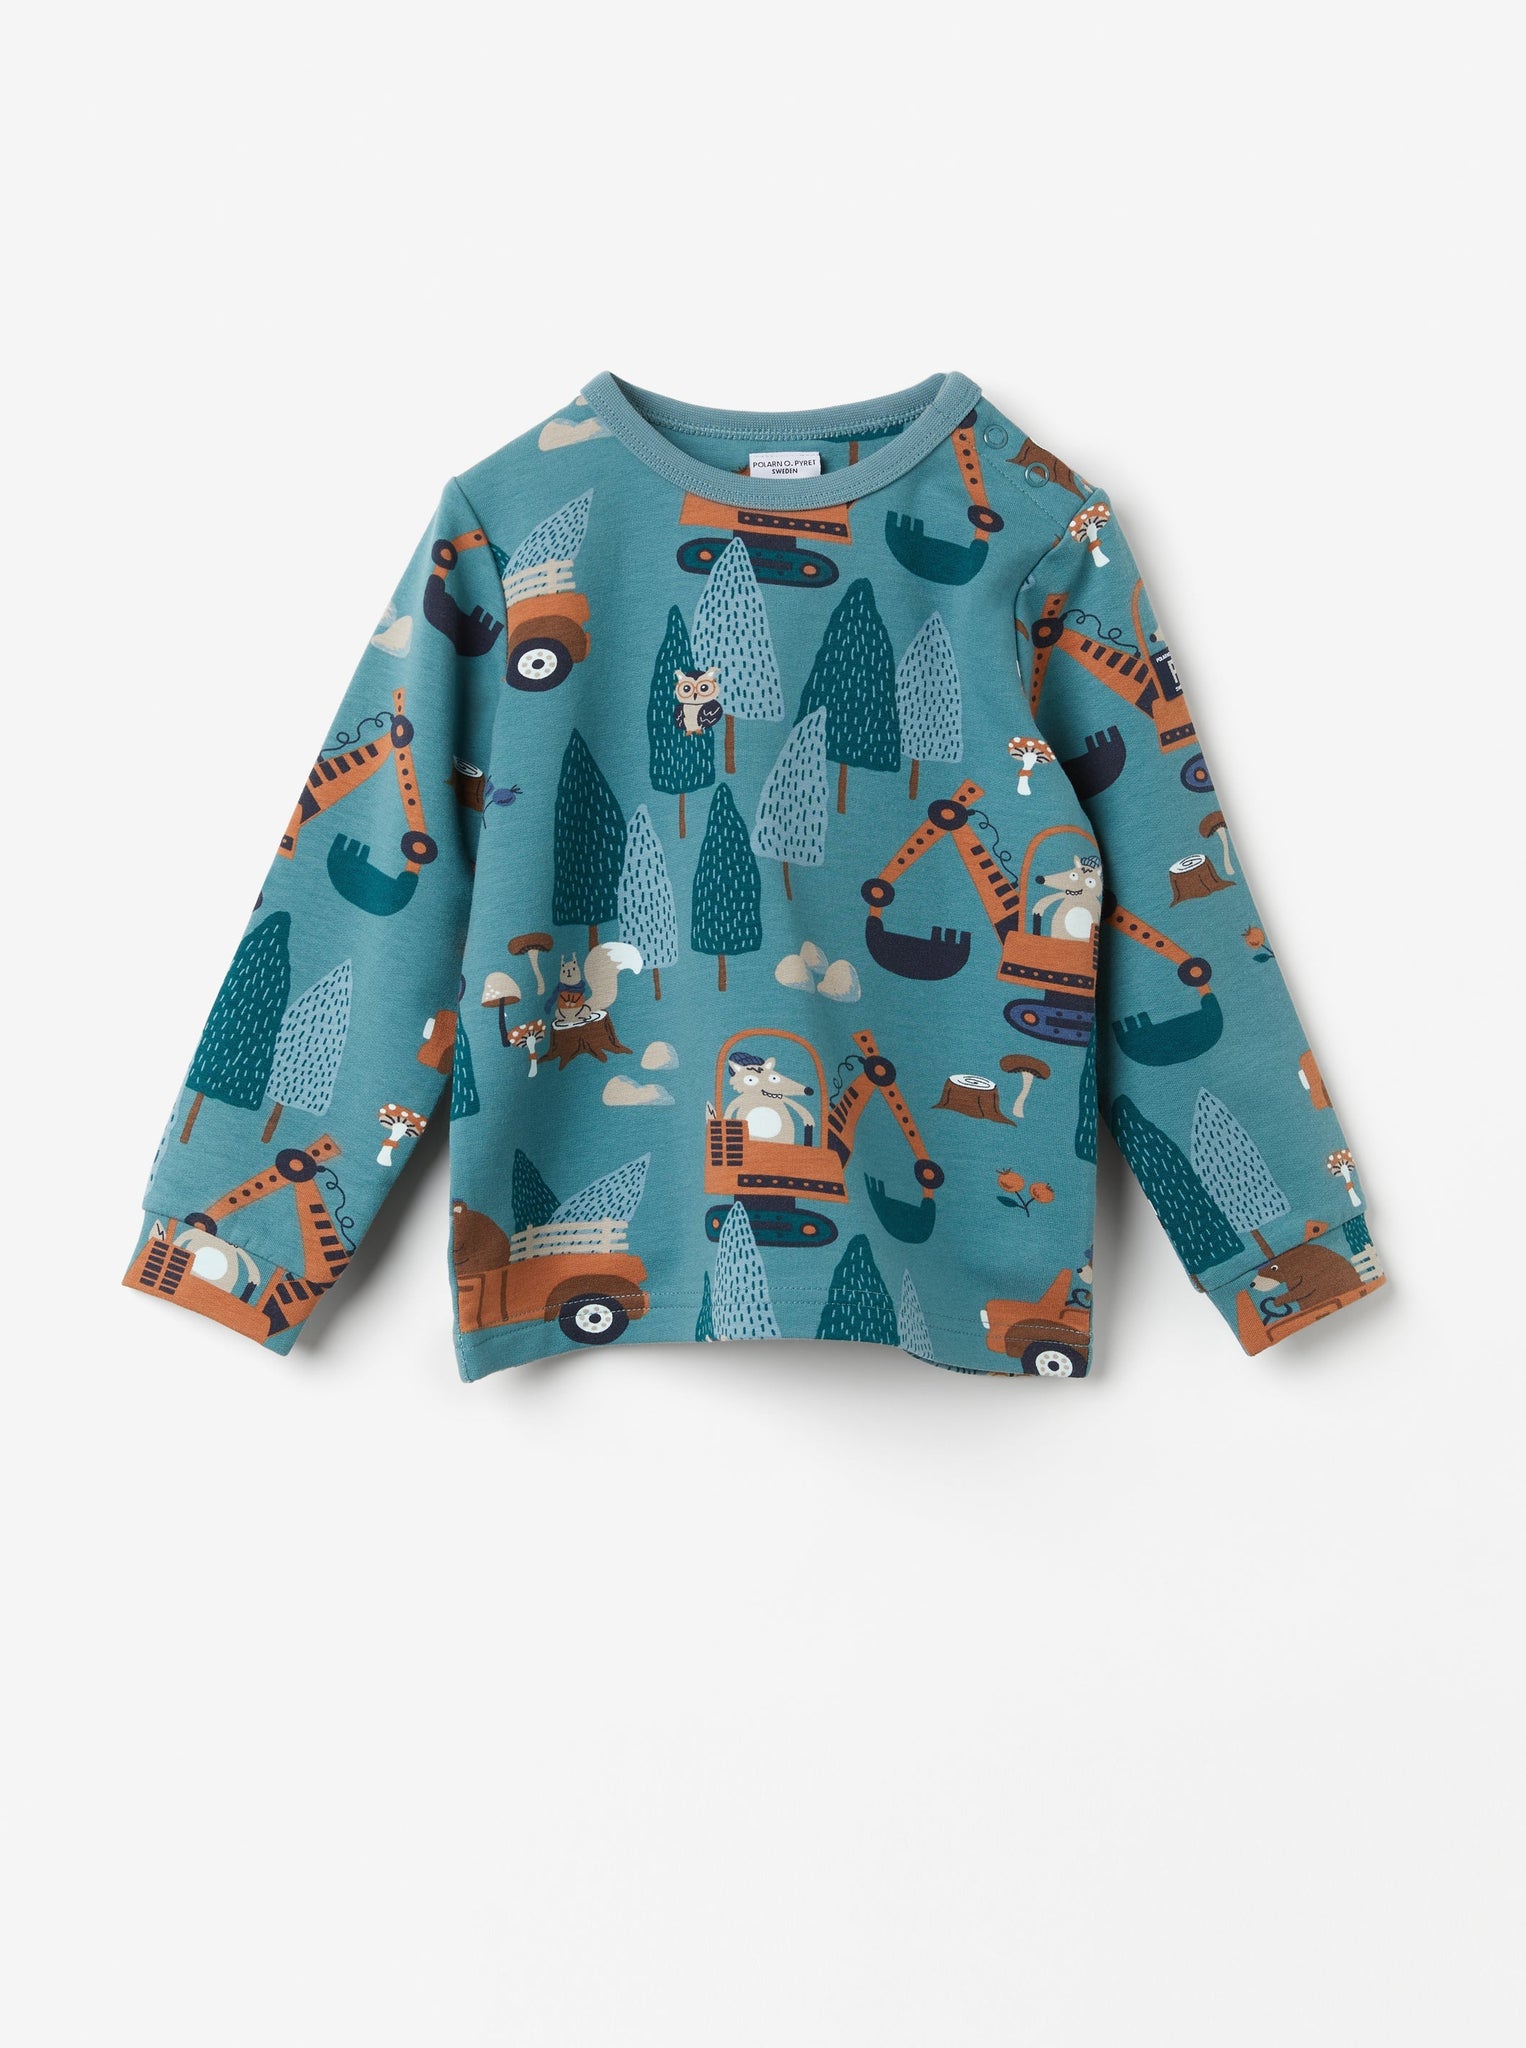 Organic Cotton Nordic Blue Kids Top from the Polarn O. Pyret kidswear collection. Nordic kids clothes made from sustainable sources.